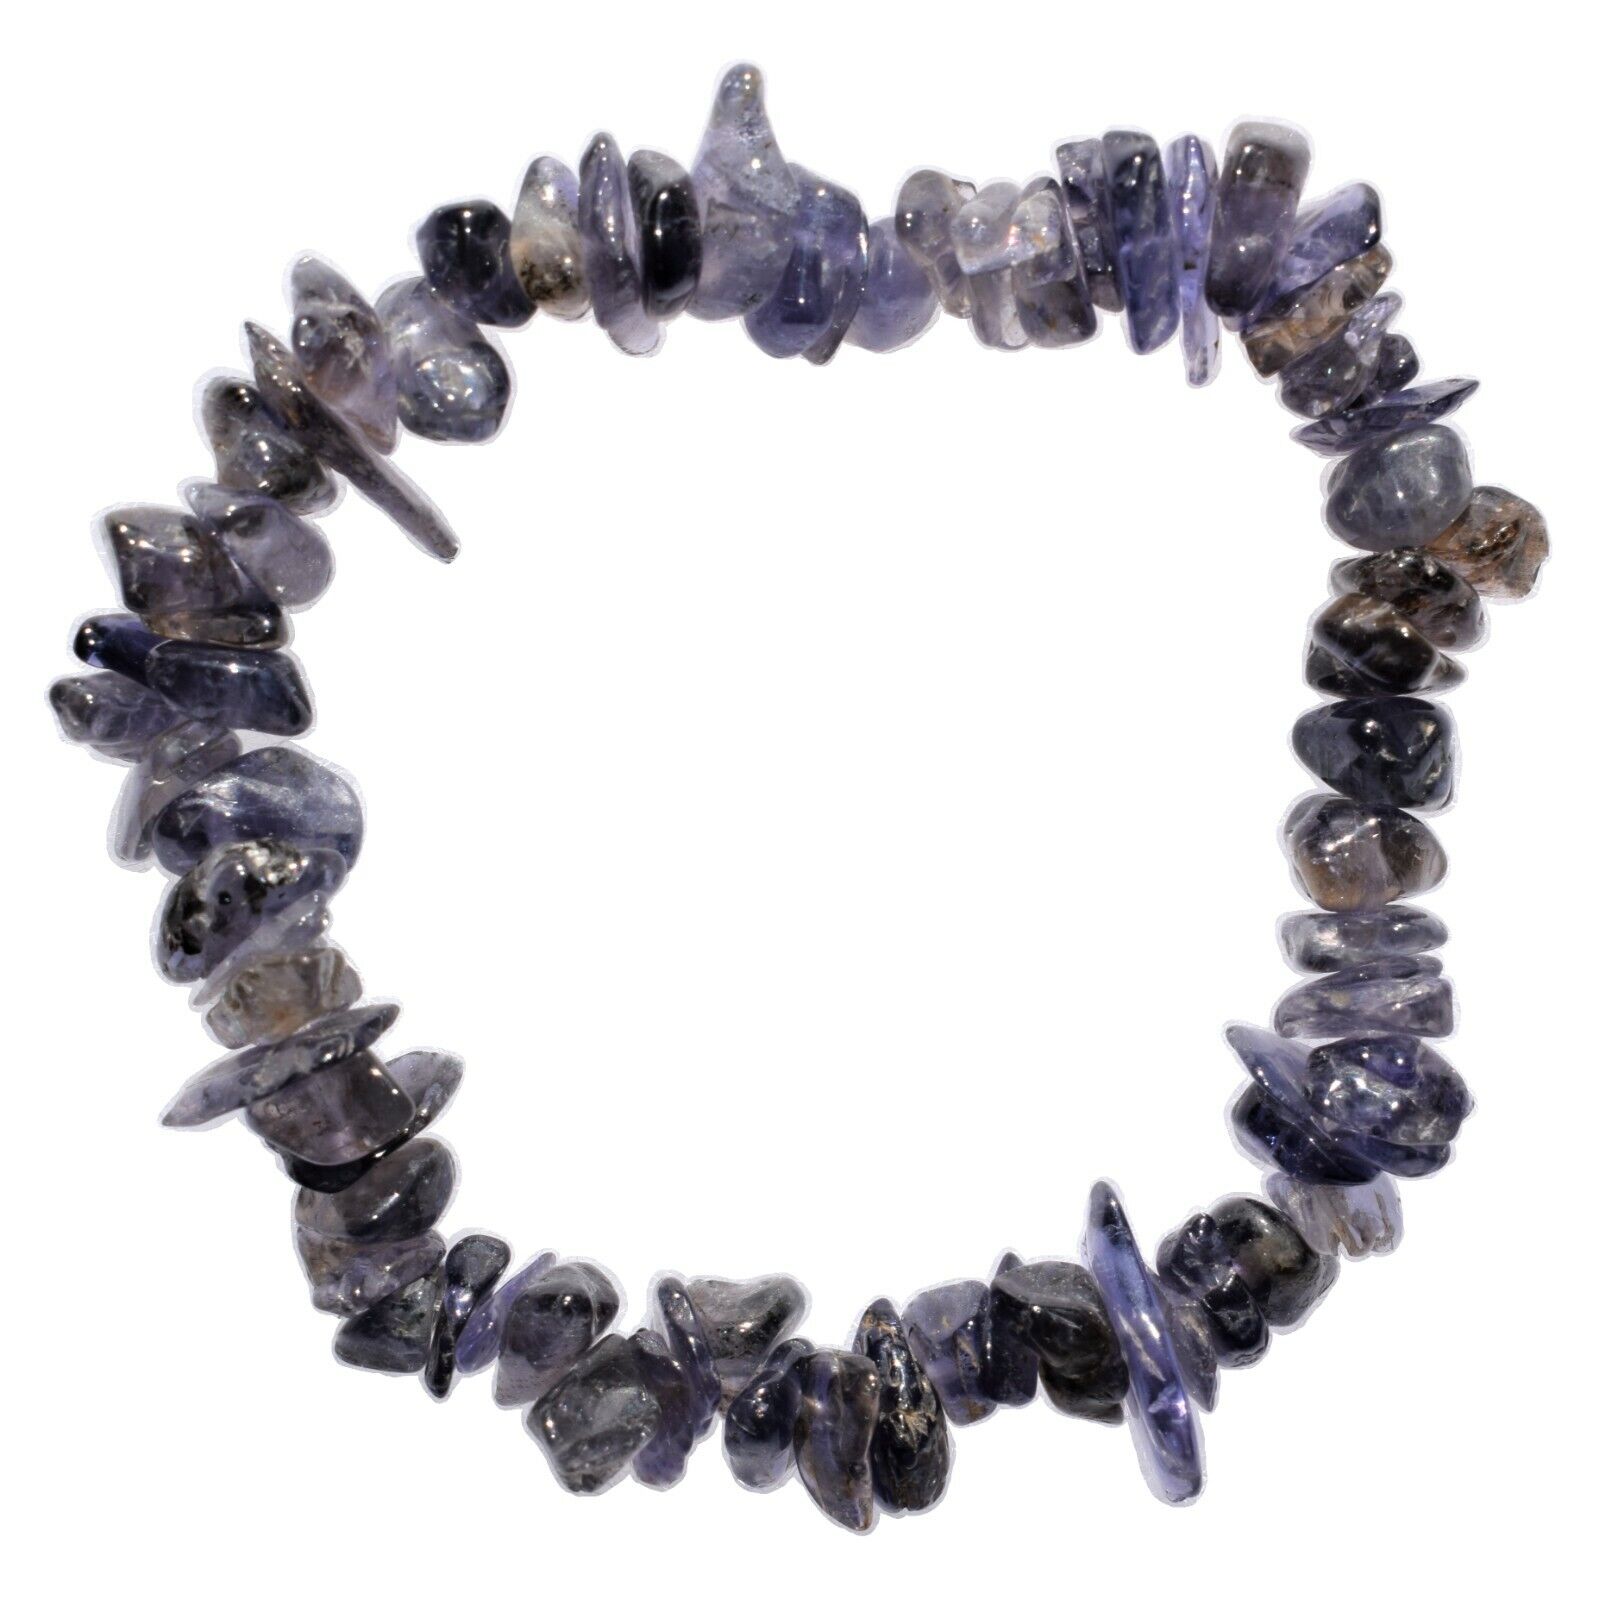 CHARGED Iolite Crystal Chip Stretchy Bracelet + Selenite Pocket Puffy Heart